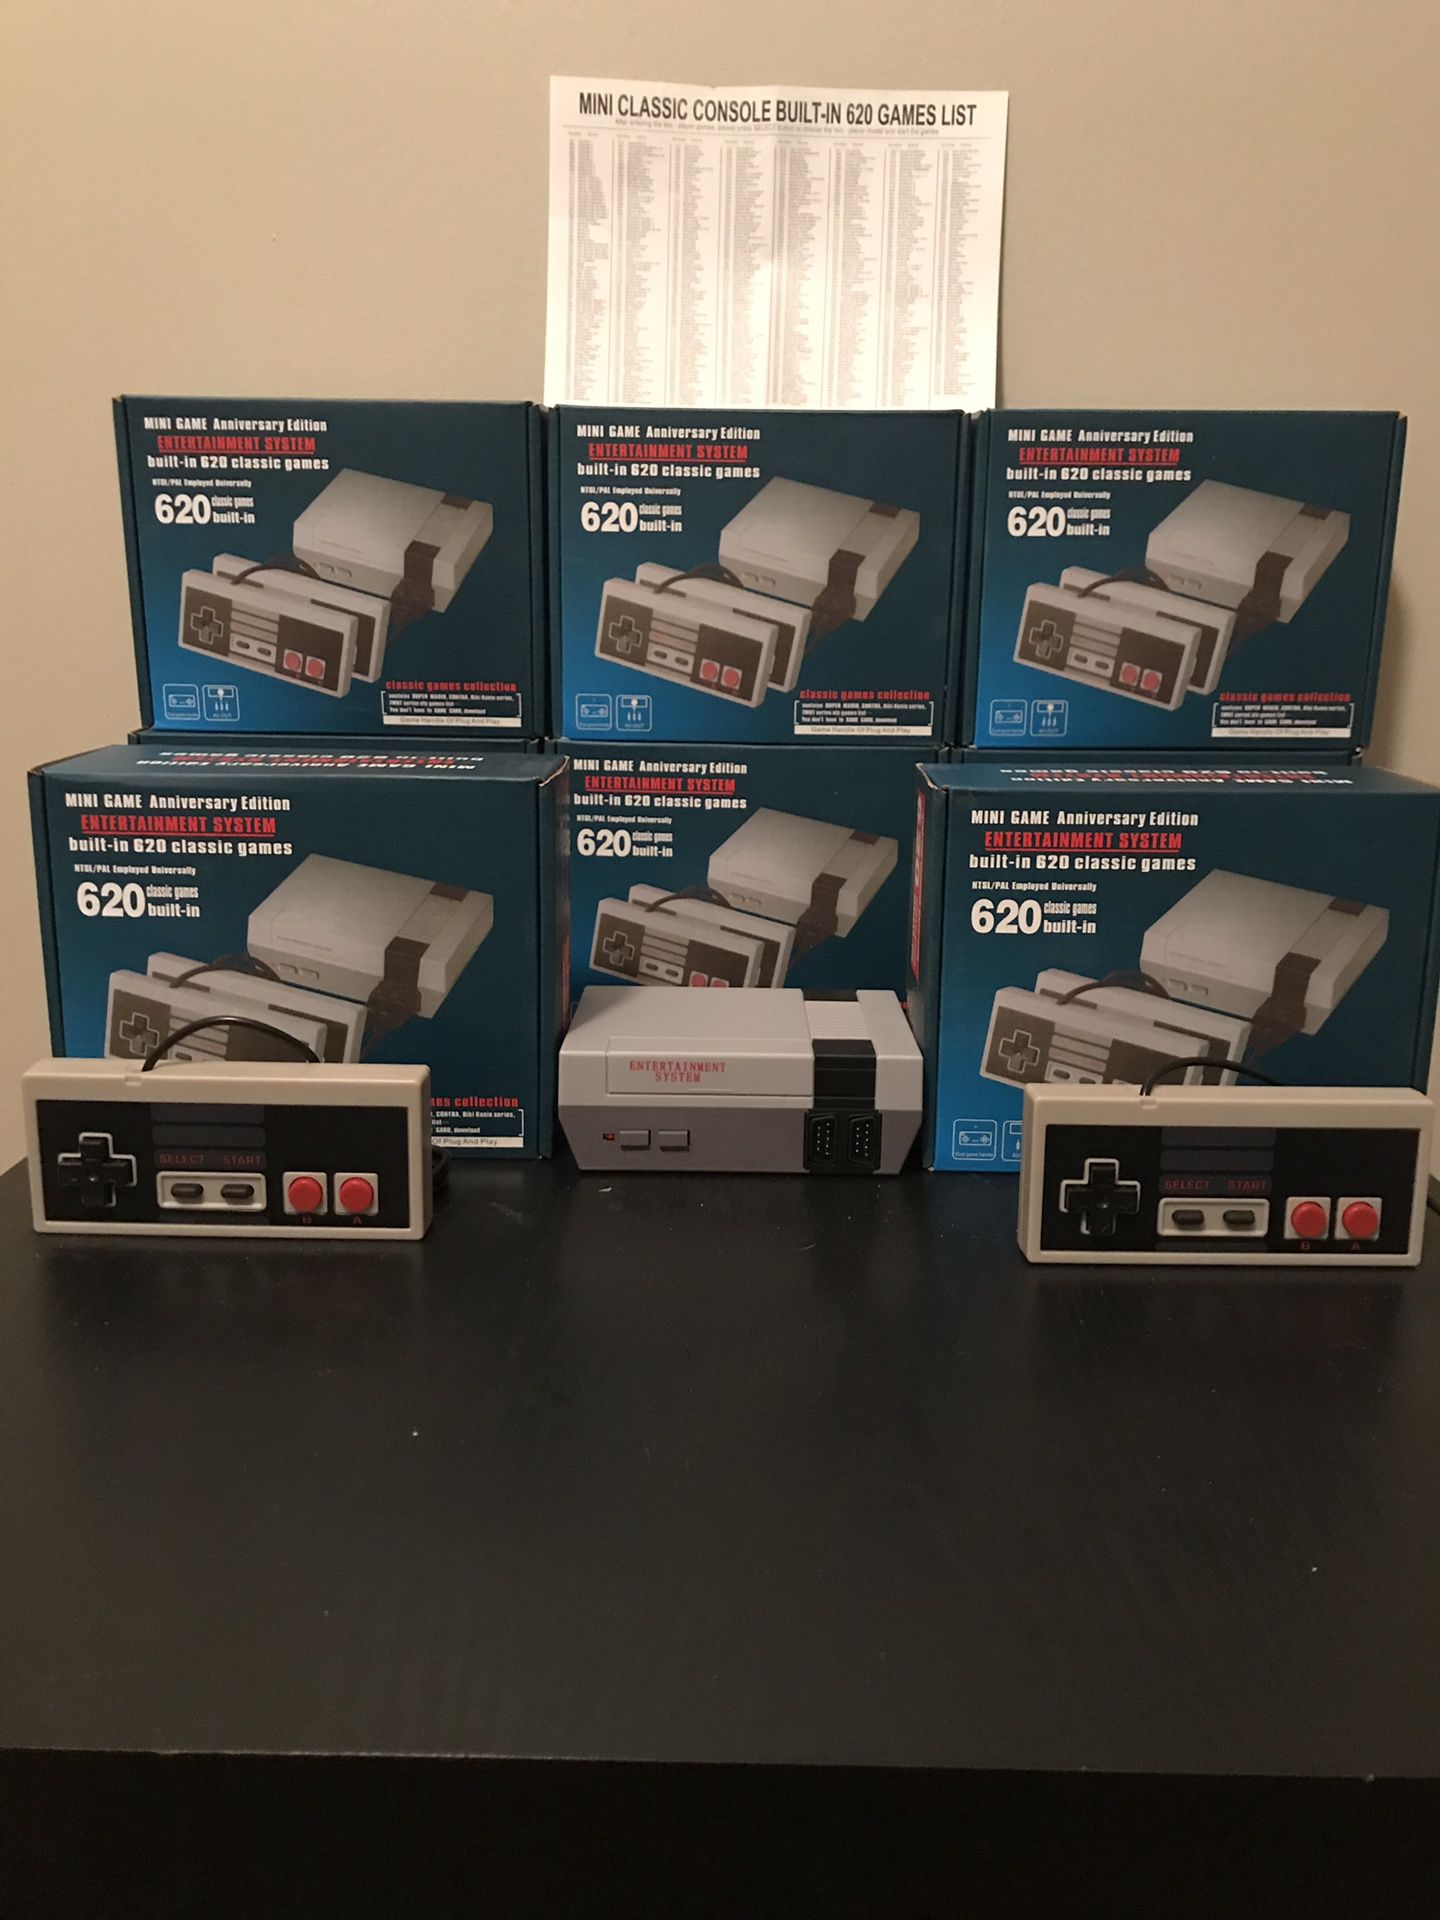 (Affordable Gifts) Nintendo Mini! Over 400 classic games in one!!